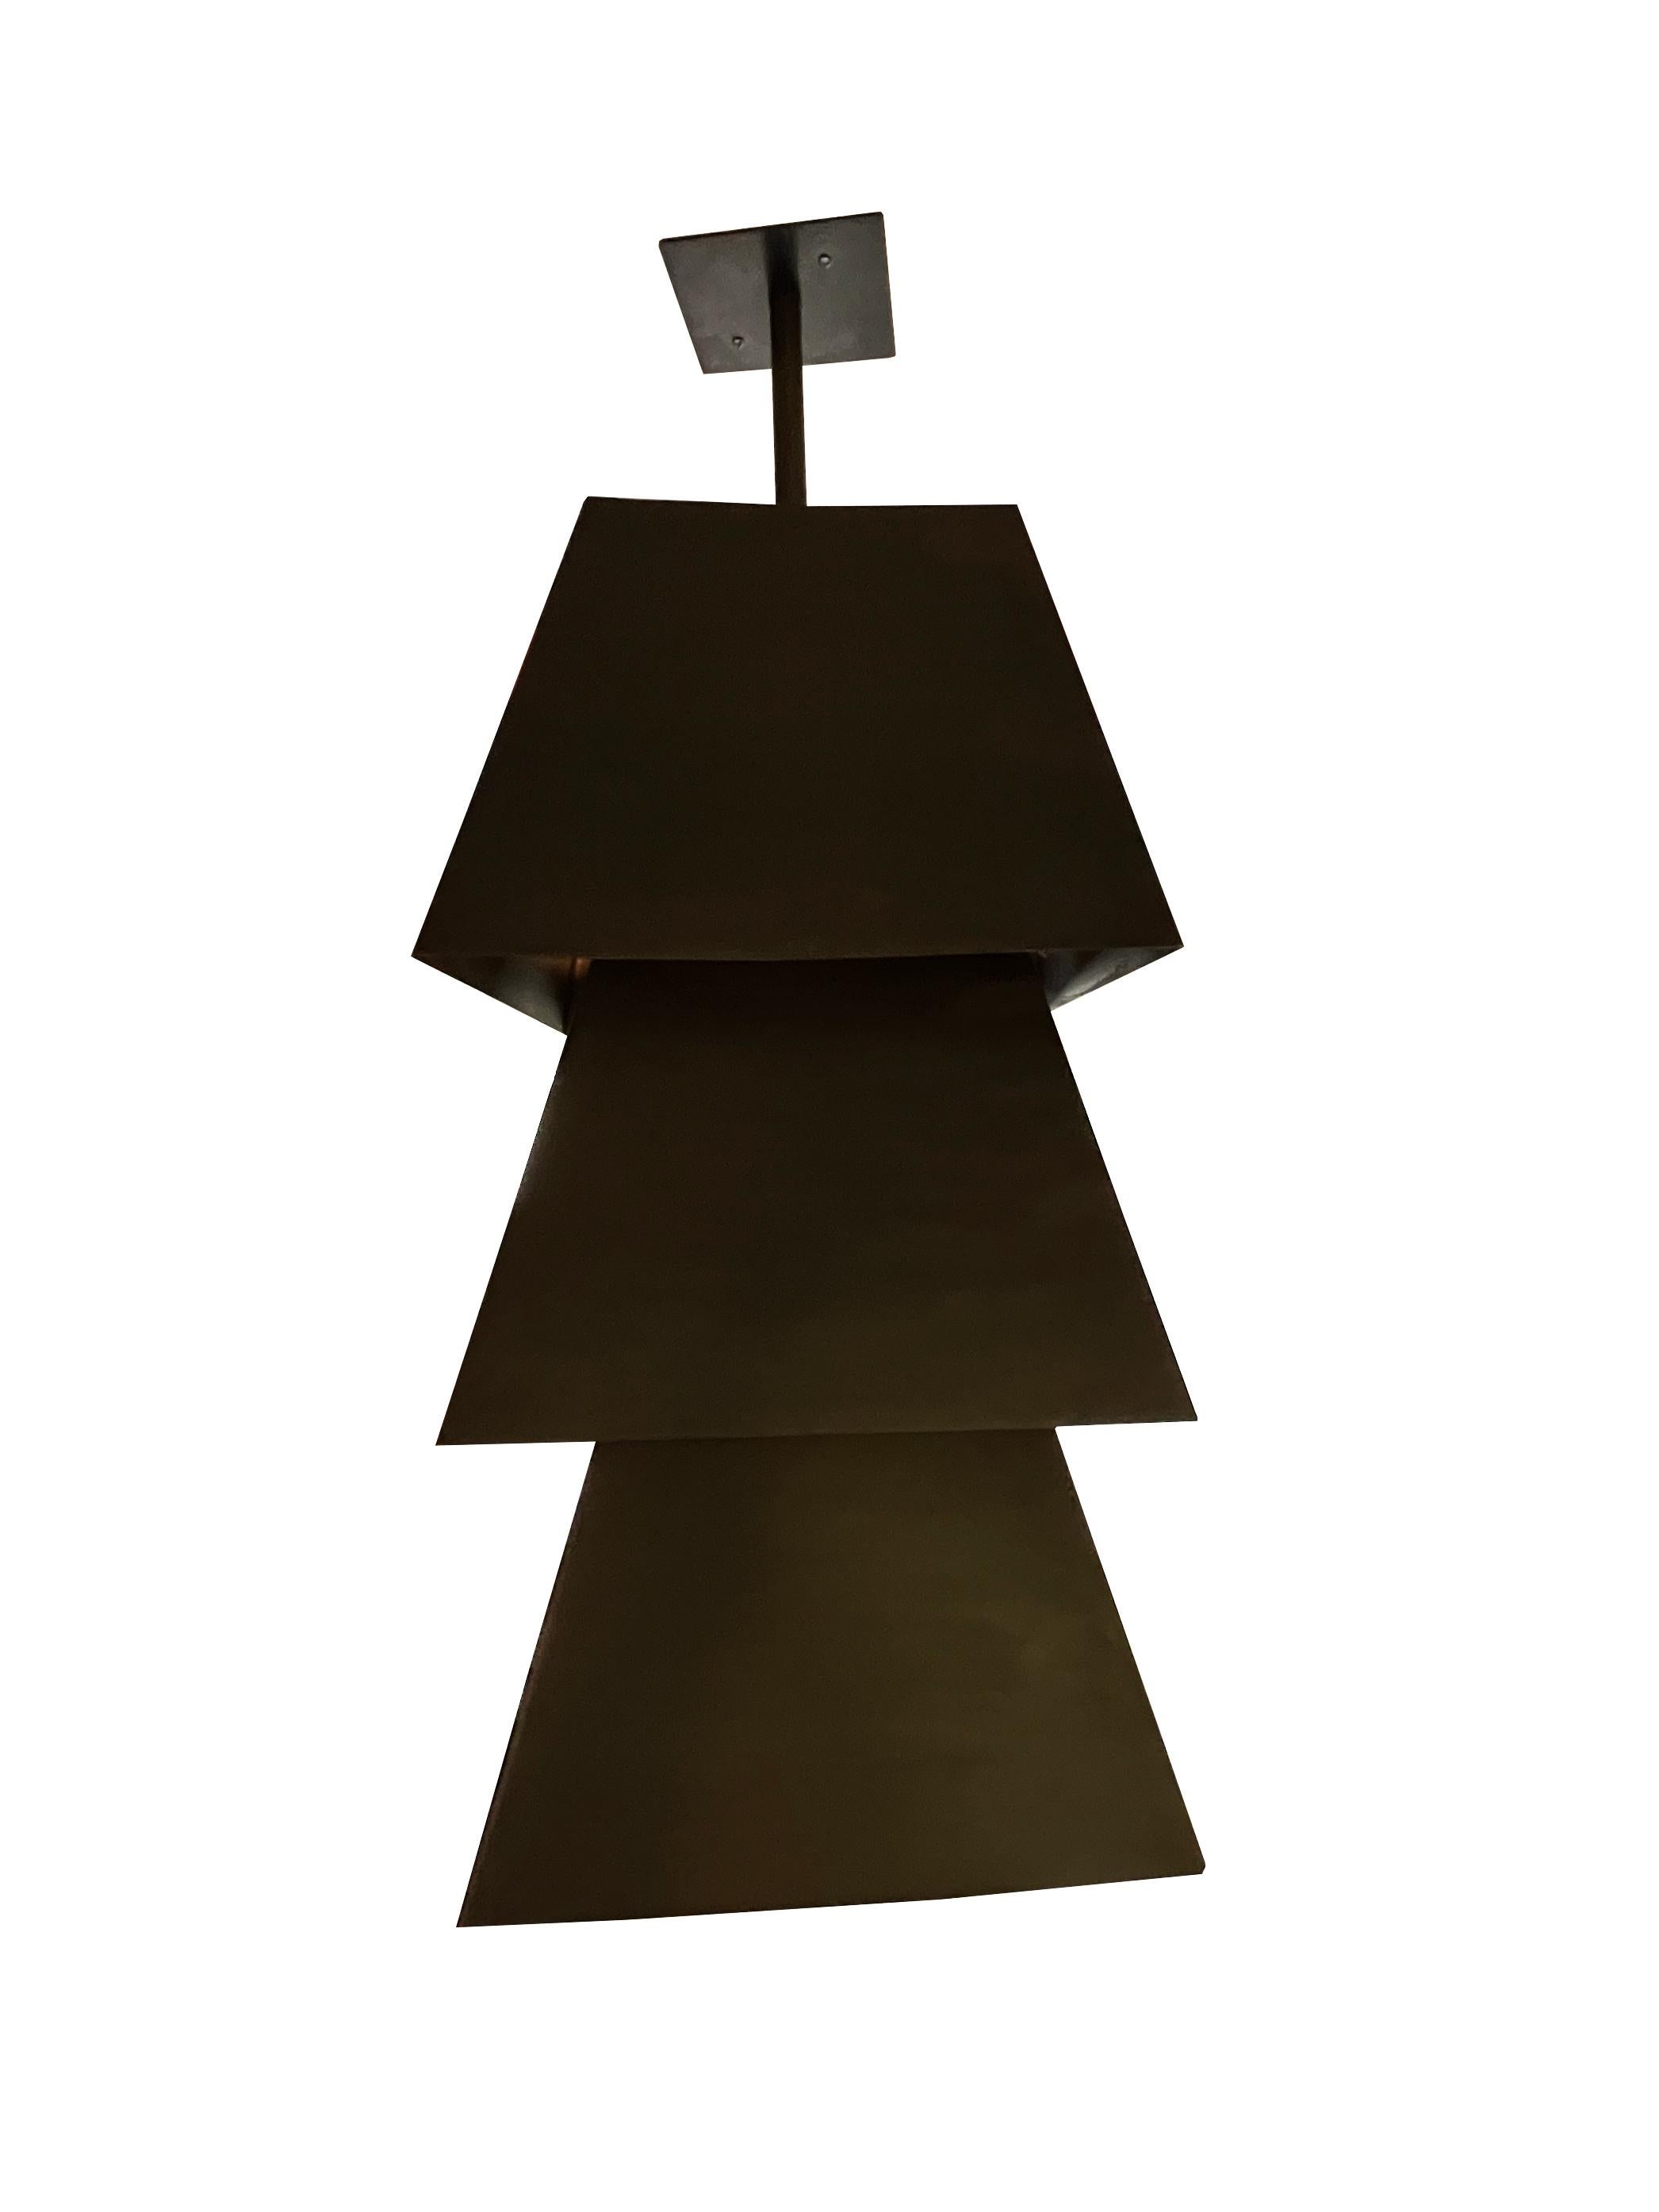 Volumetric stacked trapezoid celling fixture in black steel design by Juan Montoya. This ceiling fixture allows light to shine through 3 openings making the piece not only functionable but also a sculptural light piece. These industrial style